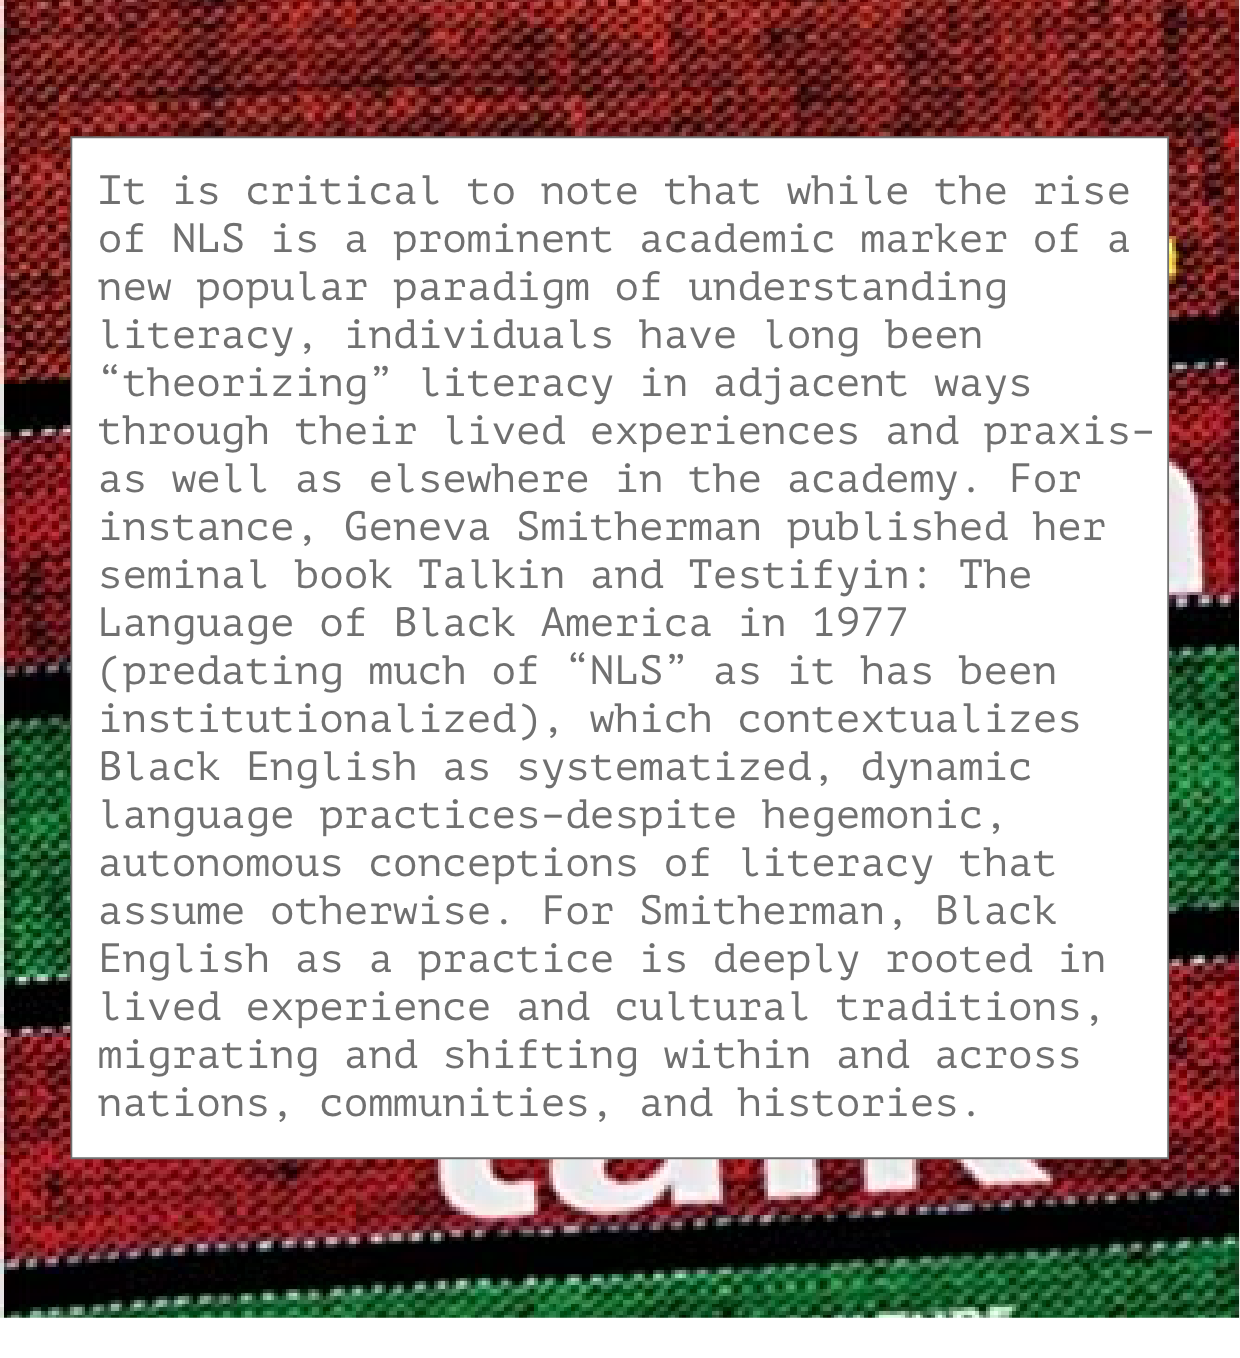 It is critical to note that while the rise of NLS is a prominent academic marker of a new popular paradigm of understanding literacy, individuals have long been “theorizing” literacy in adjacent ways through their lived experiences and praxis–as well as elsewhere in the academy. For instance, Geneva Smitherman published her seminal book Talkin and Testifyin: The Language of Black America in 1977 (predating much of “NLS” as it has been institutionalized), which contextualizes Black English as systematized, dynamic language practices–despite hegemonic, autonomous conceptions of literacy that assume otherwise. For Smitherman, Black English as a practice is deeply rooted in lived experience and cultural traditions, migrating and shifting within and across nations, communities, and histories.